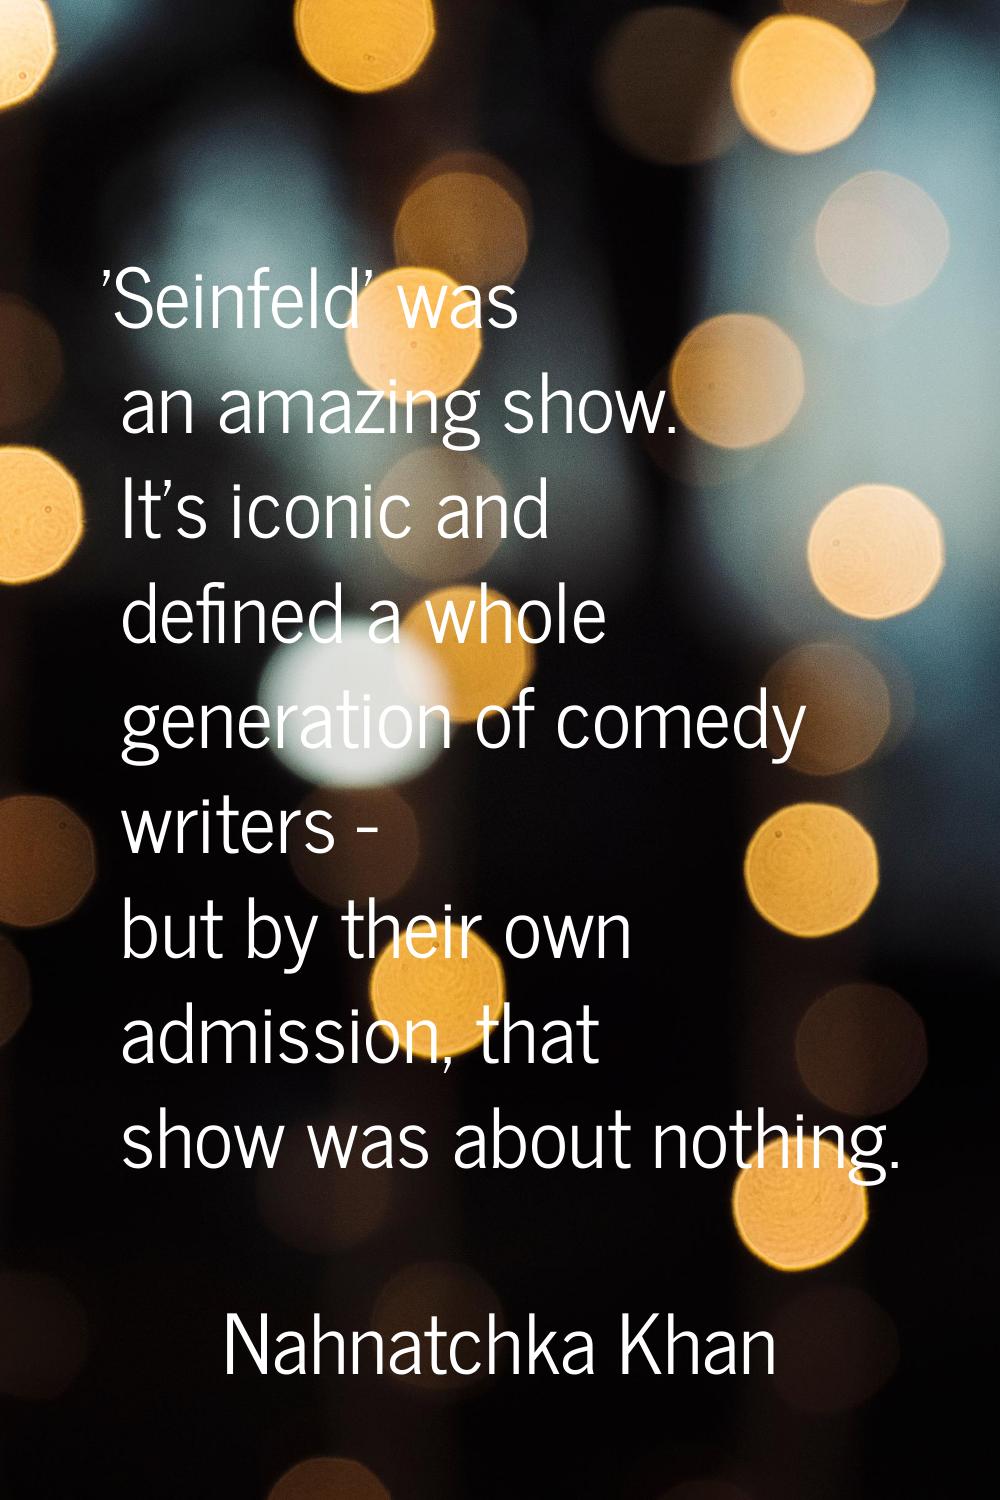 'Seinfeld' was an amazing show. It's iconic and defined a whole generation of comedy writers - but 